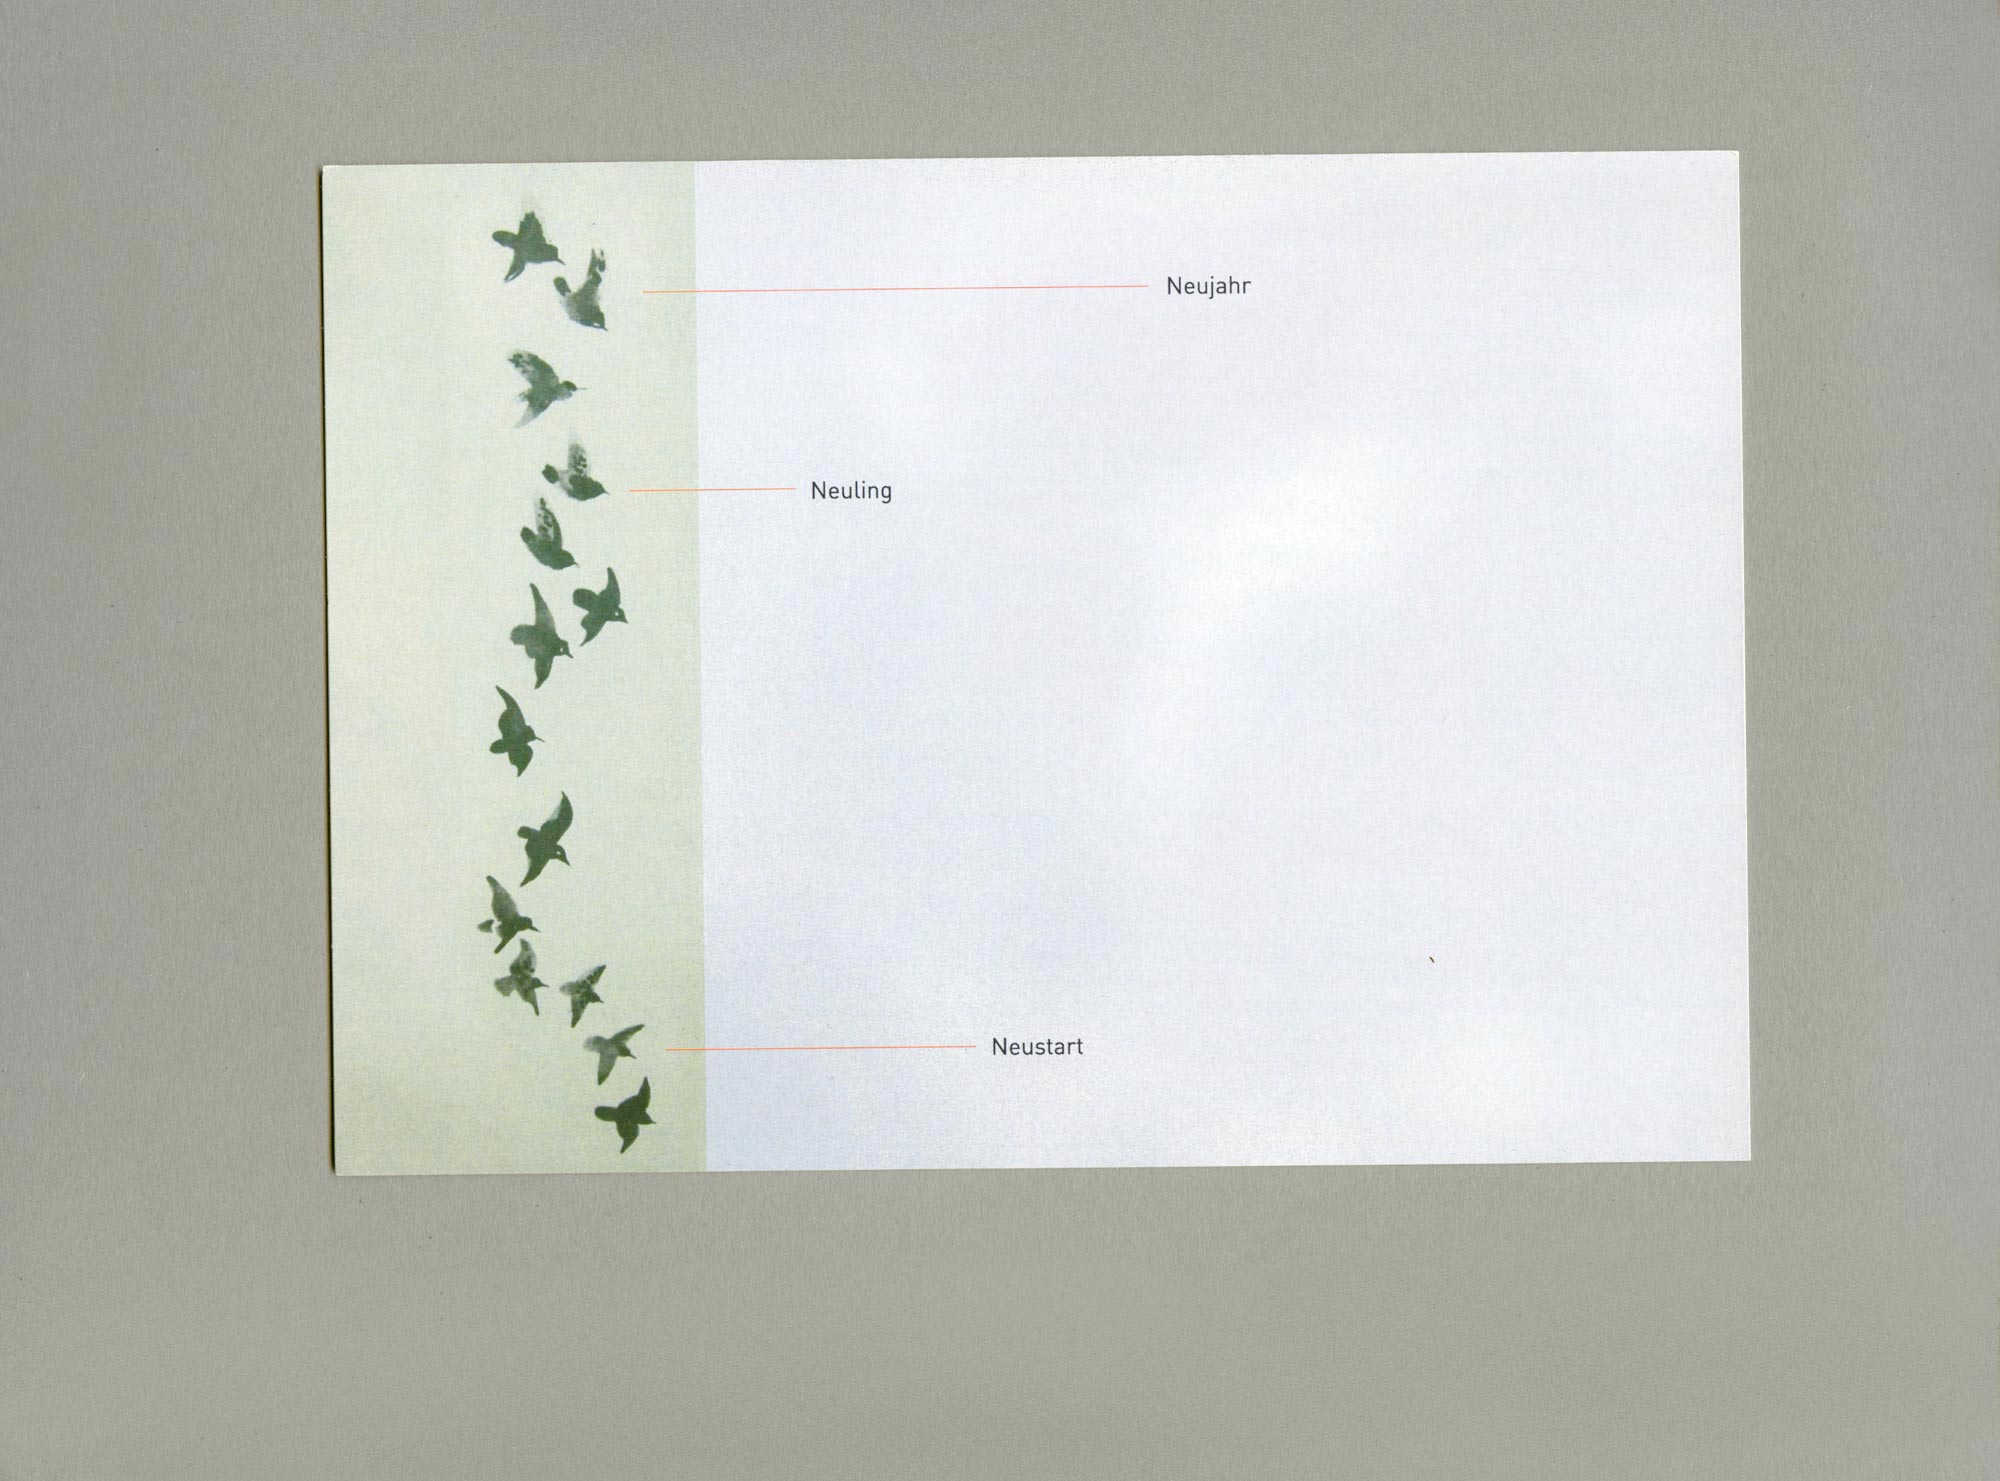 Aquarell Illustration. A row of birds. Small notations on the side.